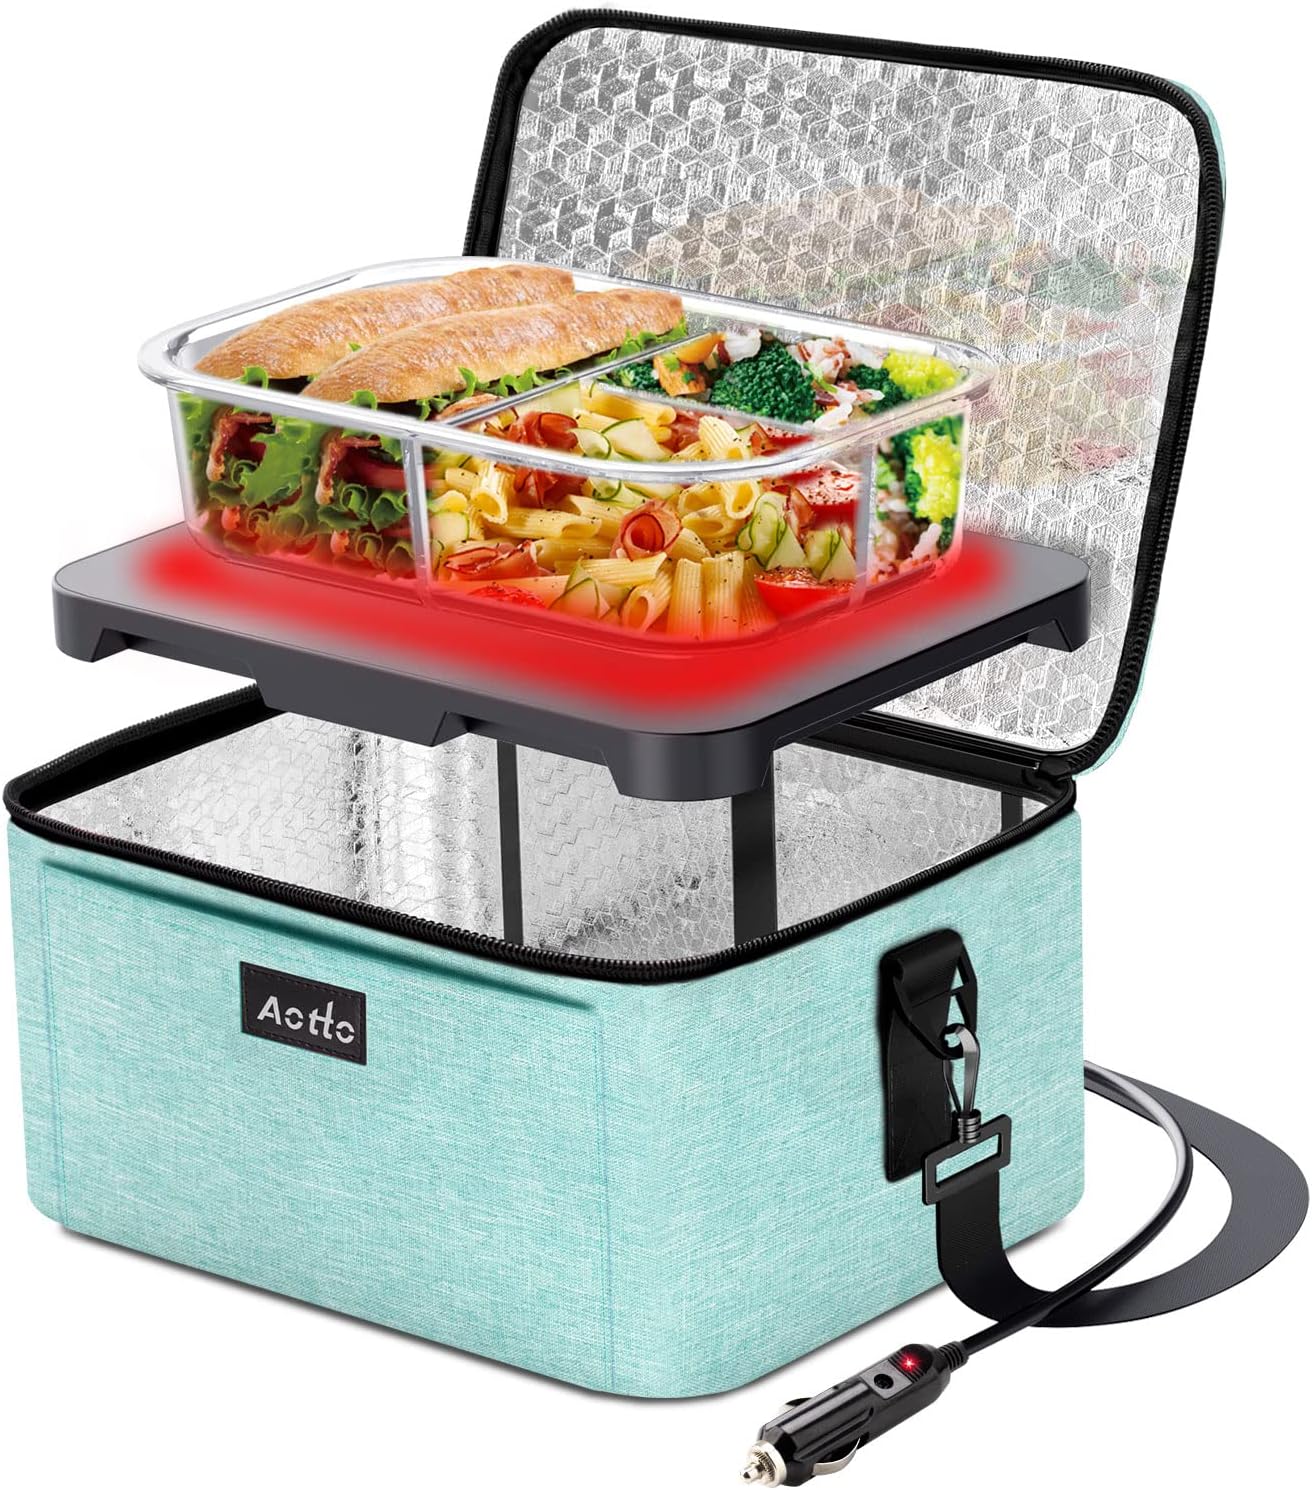 Aotto Portable Food Warmer Personal Mini Portable Oven - 110V Electric  Heated Lunch Box for Work with Wall Plug for Cooking and Reheating Meals in  Office, Hotel, Potlucks, Home Kitchen (Blue) 